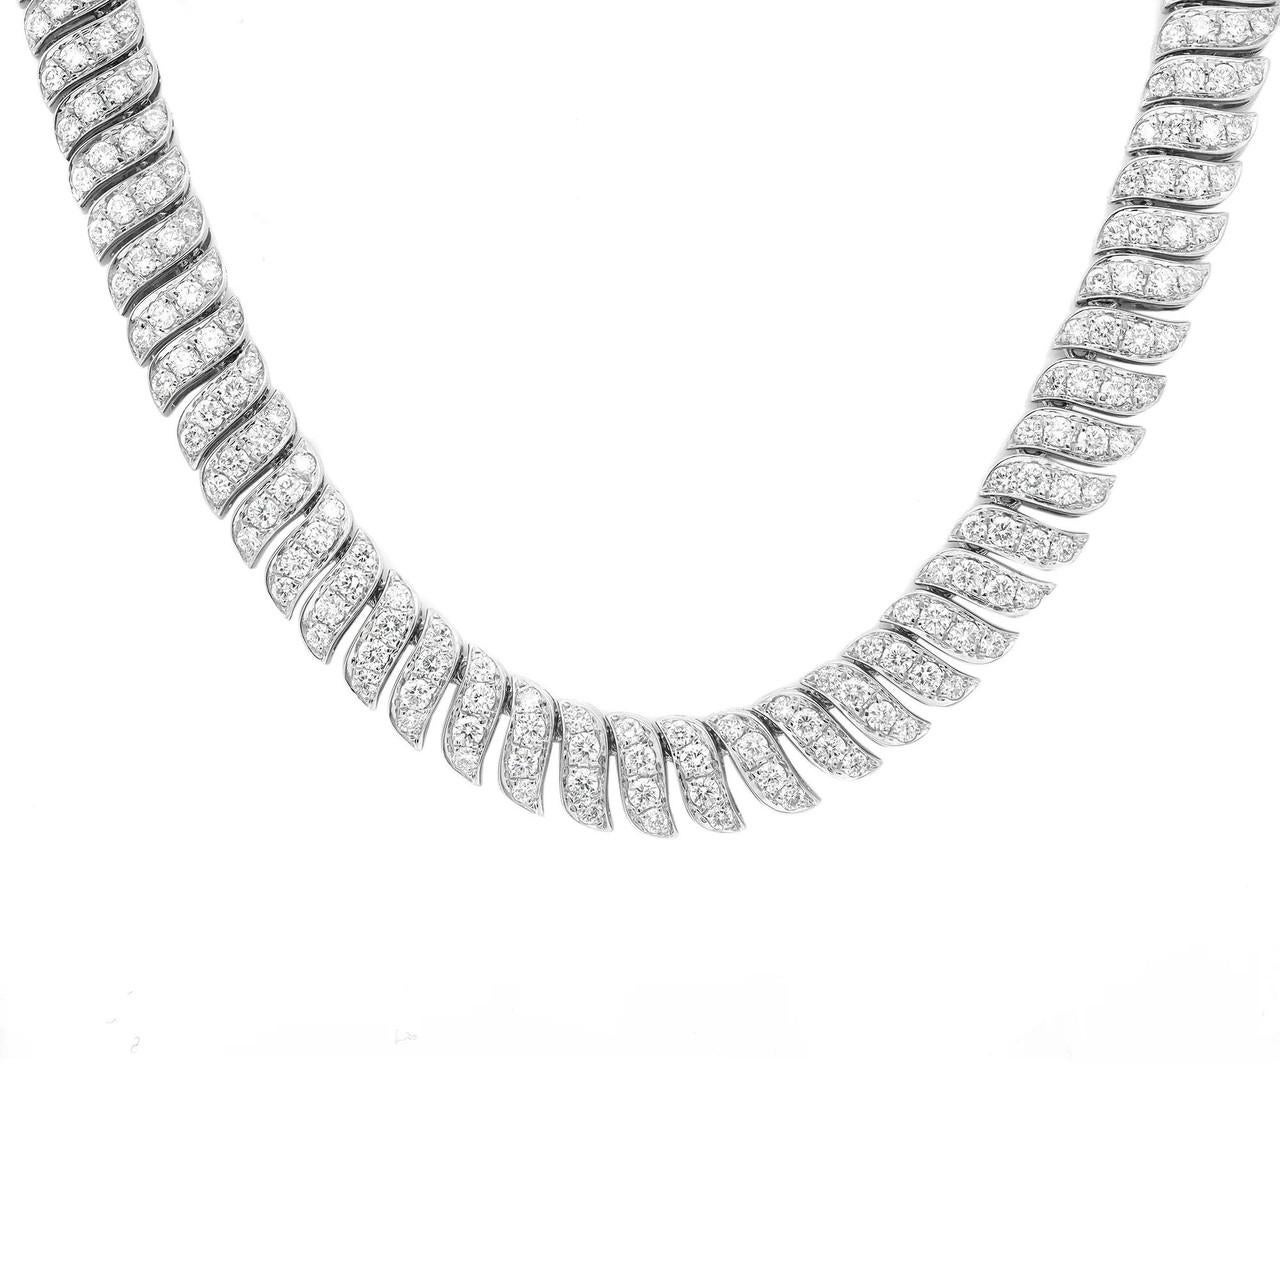 Elizabeth Fine Jewelry 8.33 Carat Round Cut Diamond Necklace 18K White Gold In New Condition For Sale In New York, NY